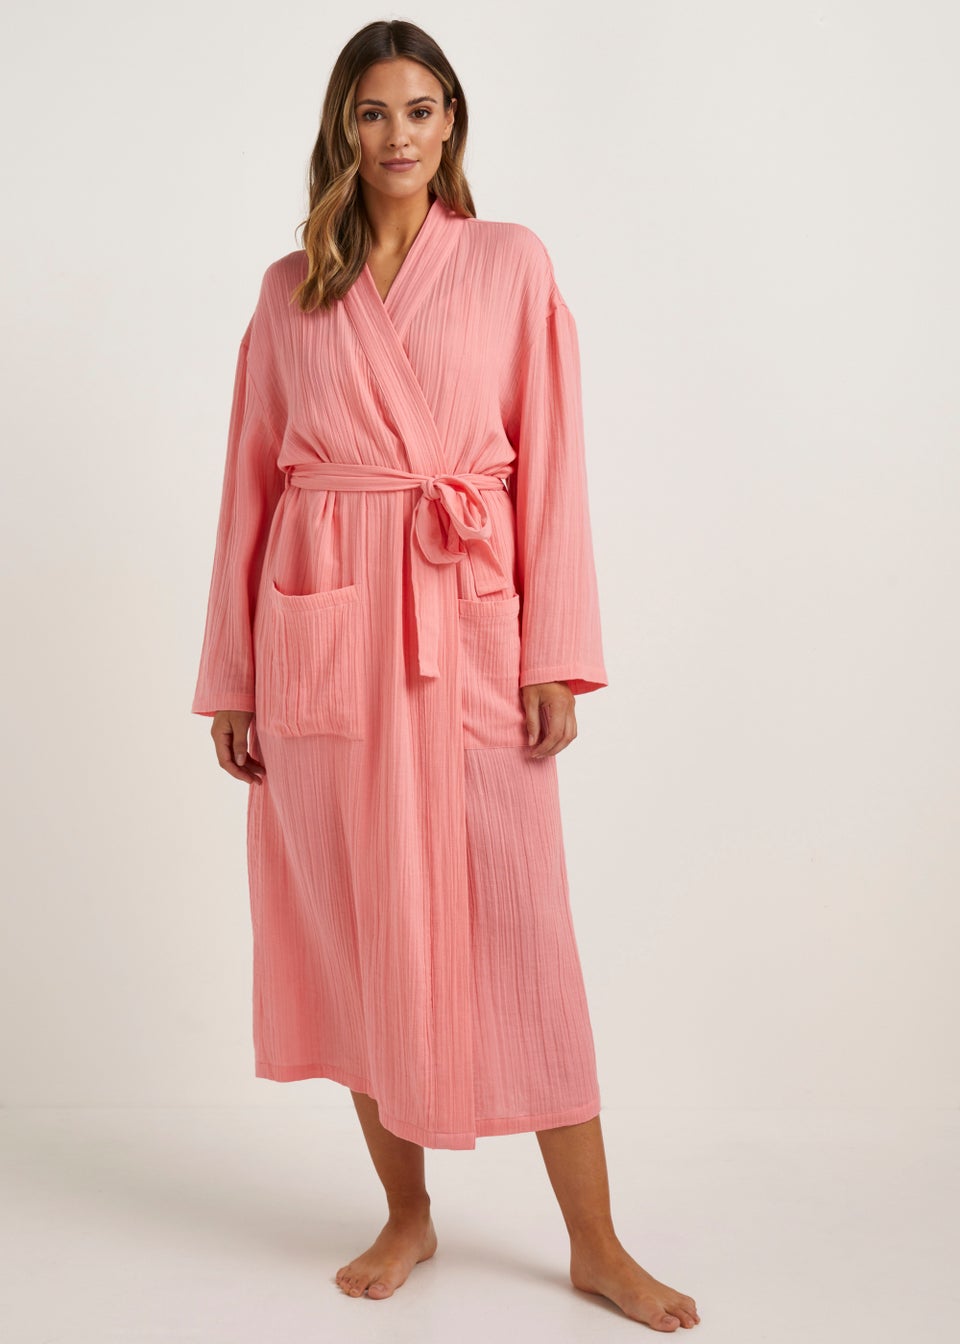 WOMENS LADIES WAFFLE 100% Cotton Summer Dressing Gowns Robe Spa Gym Suana  £11.99 - PicClick UK